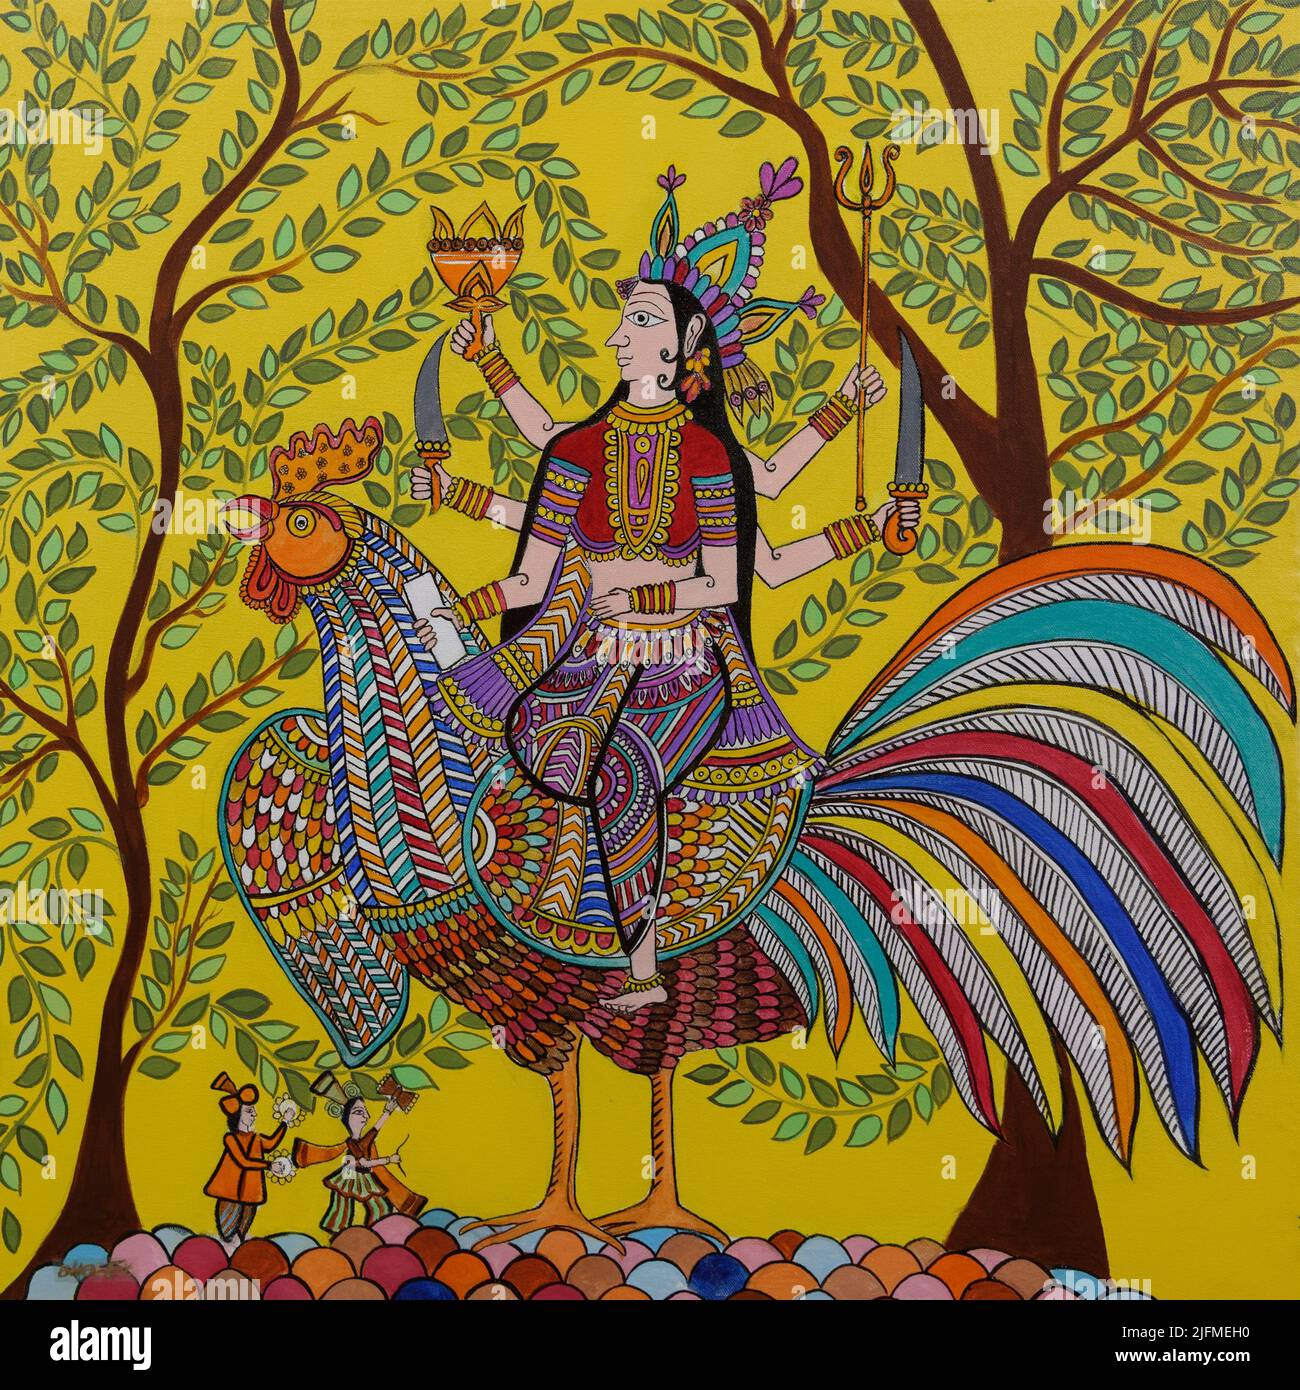 Painting representing a deity seated on a cockerel, For editorial use only, Temple of the Hijra community group, Allahabad Kumbh Mela, World’s largest Stock Photo